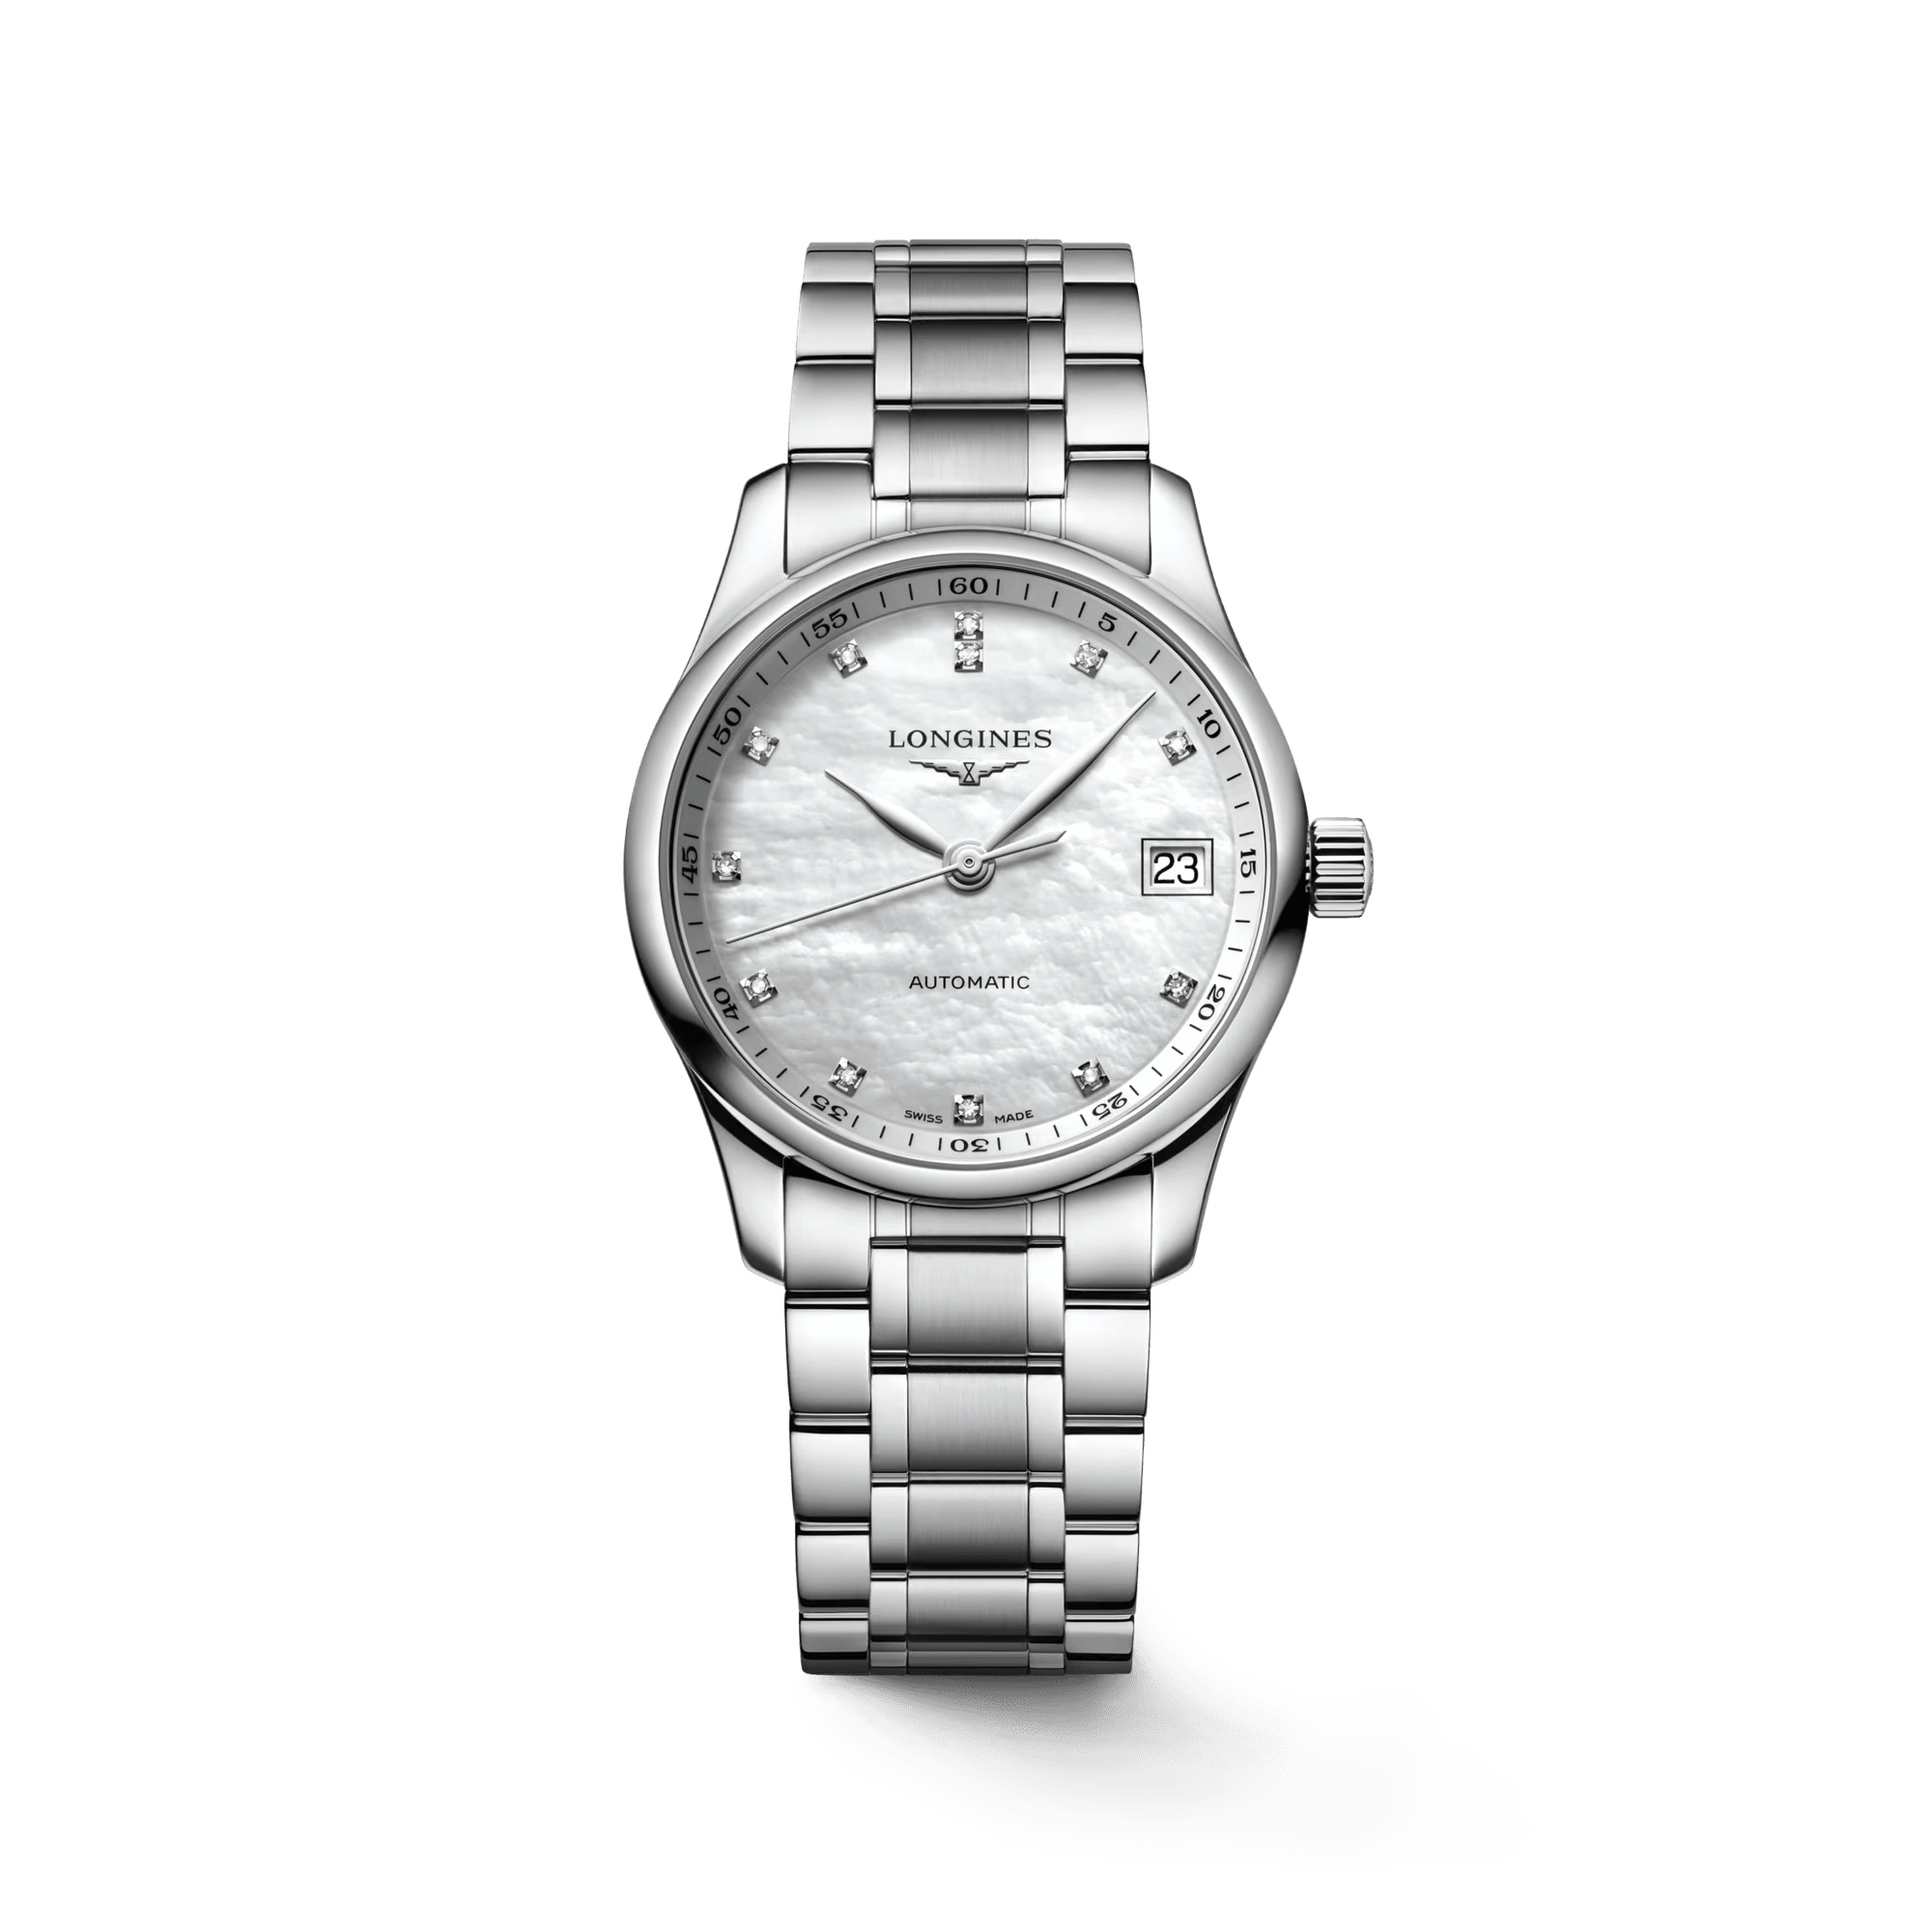 The Longines Master Collection Automatic Women's Watch L23574876